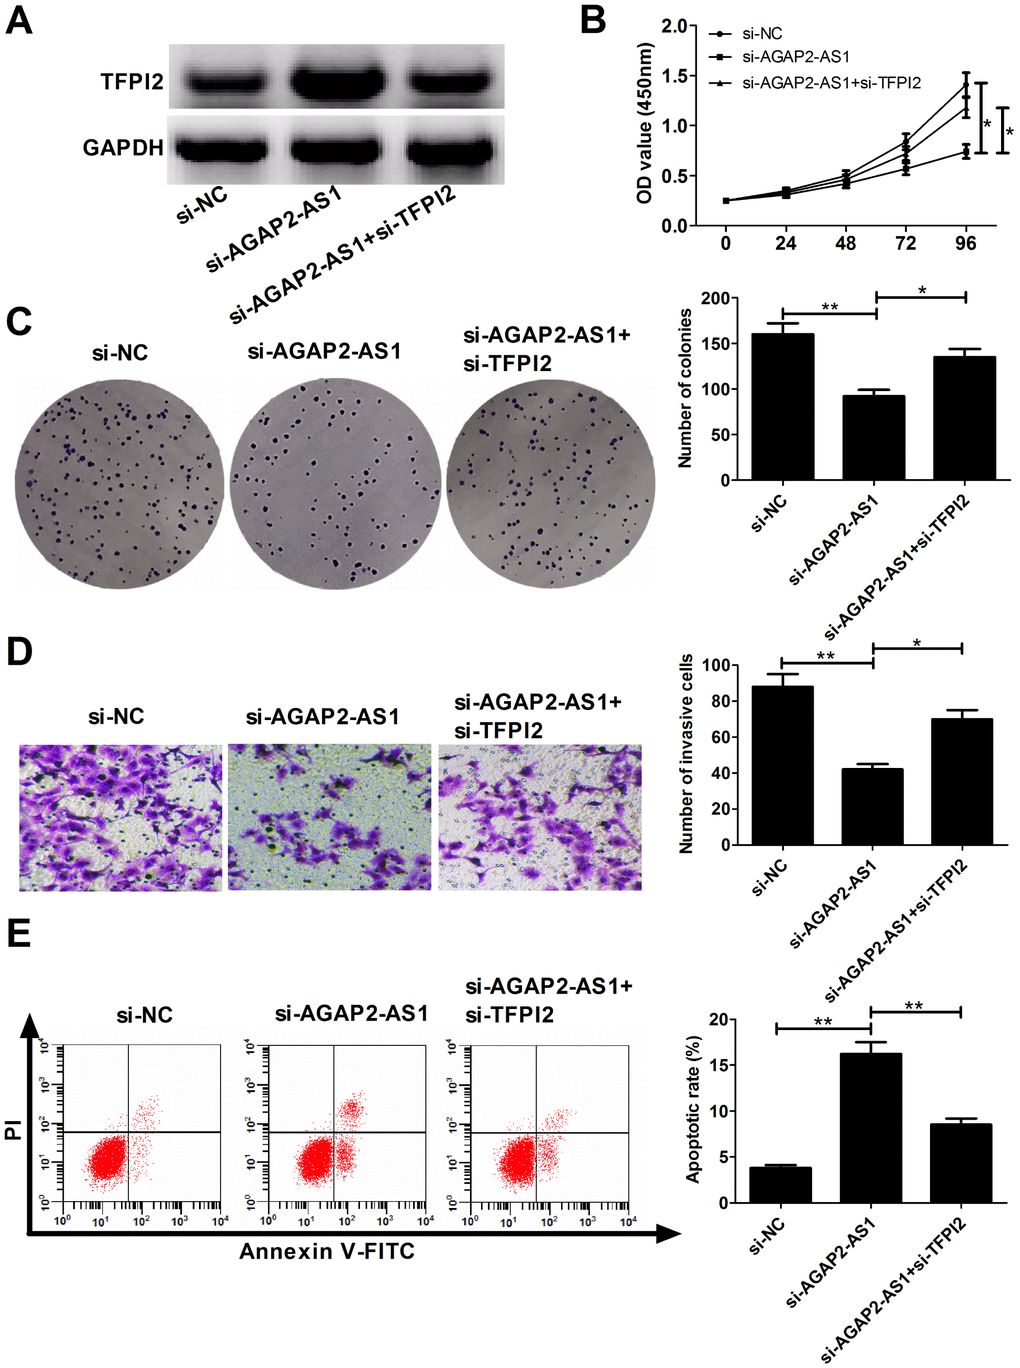 AGAP2-AS1 promotes GBM progression partially through epigenetically inhibiting TFPI2 expression in vitro. U87/MG cells were transfected with si-NC, si-AGAP2-AS1, or co-transfected with si-AGAP2-AS1 and si-TFPI2. (A) Western blot analysis of TFPI2 protein level in transfected cells. (B) CCK-8 assay of proliferation ability in transfected cells. (C) Colony formation assay of cloning ability in transfected cells. (D) Transwell assay of invasiveness in transfected cells. (E) Flow cytometry analysis of apoptosis in transfected cells. *P **P 